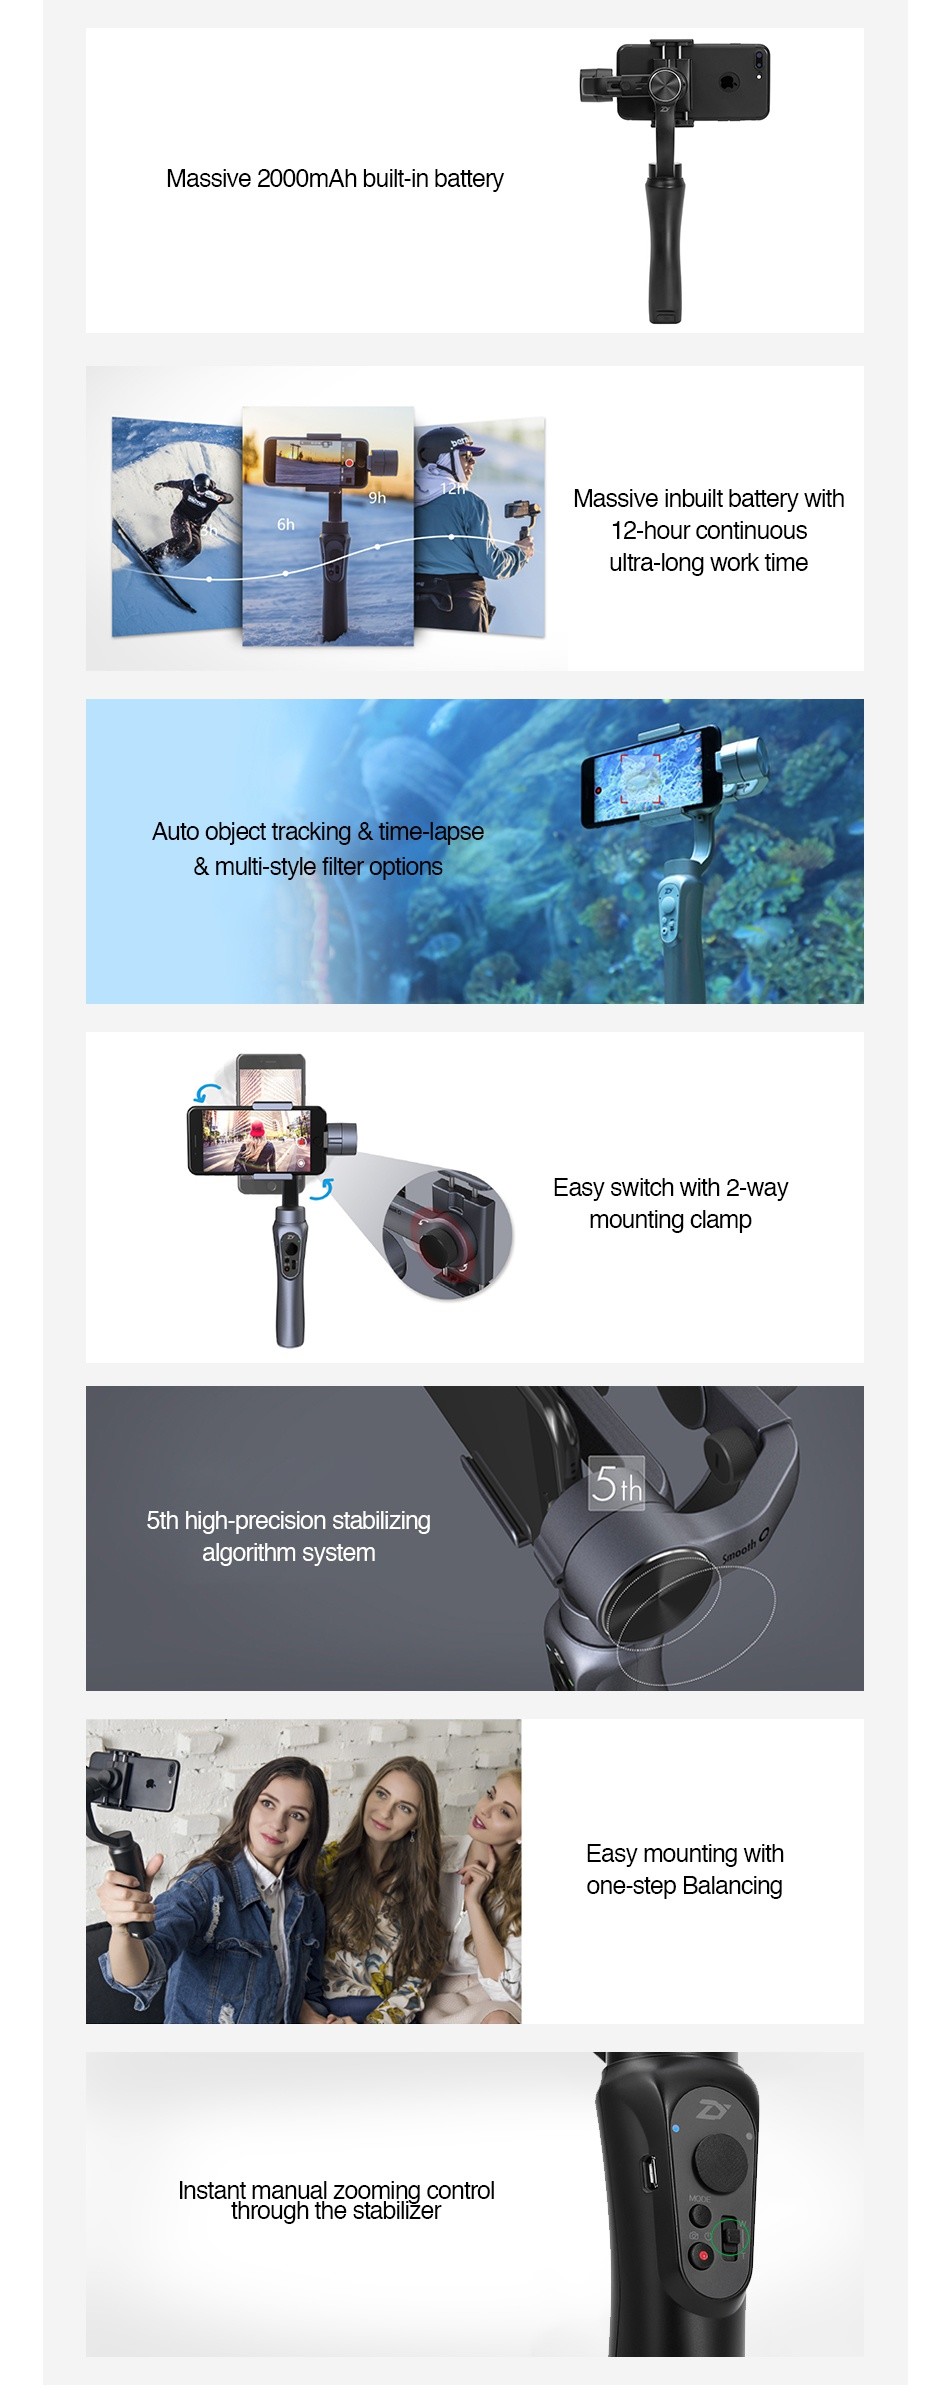 Zhiyun Smooth-Q 3-Axis Handheld Gimbal Stabilizer for Smartphone 2000mAh Massive 2000mAh built in battery Massive inbuilt battery with 12 hour continuous Auto object tracking time lapse multi style filter options Easy switch with 2 way mounting clamp th high precision stabilizing algorithm system Easy mounting with ne step Balancing Instant manual zooming control through the stabilizer